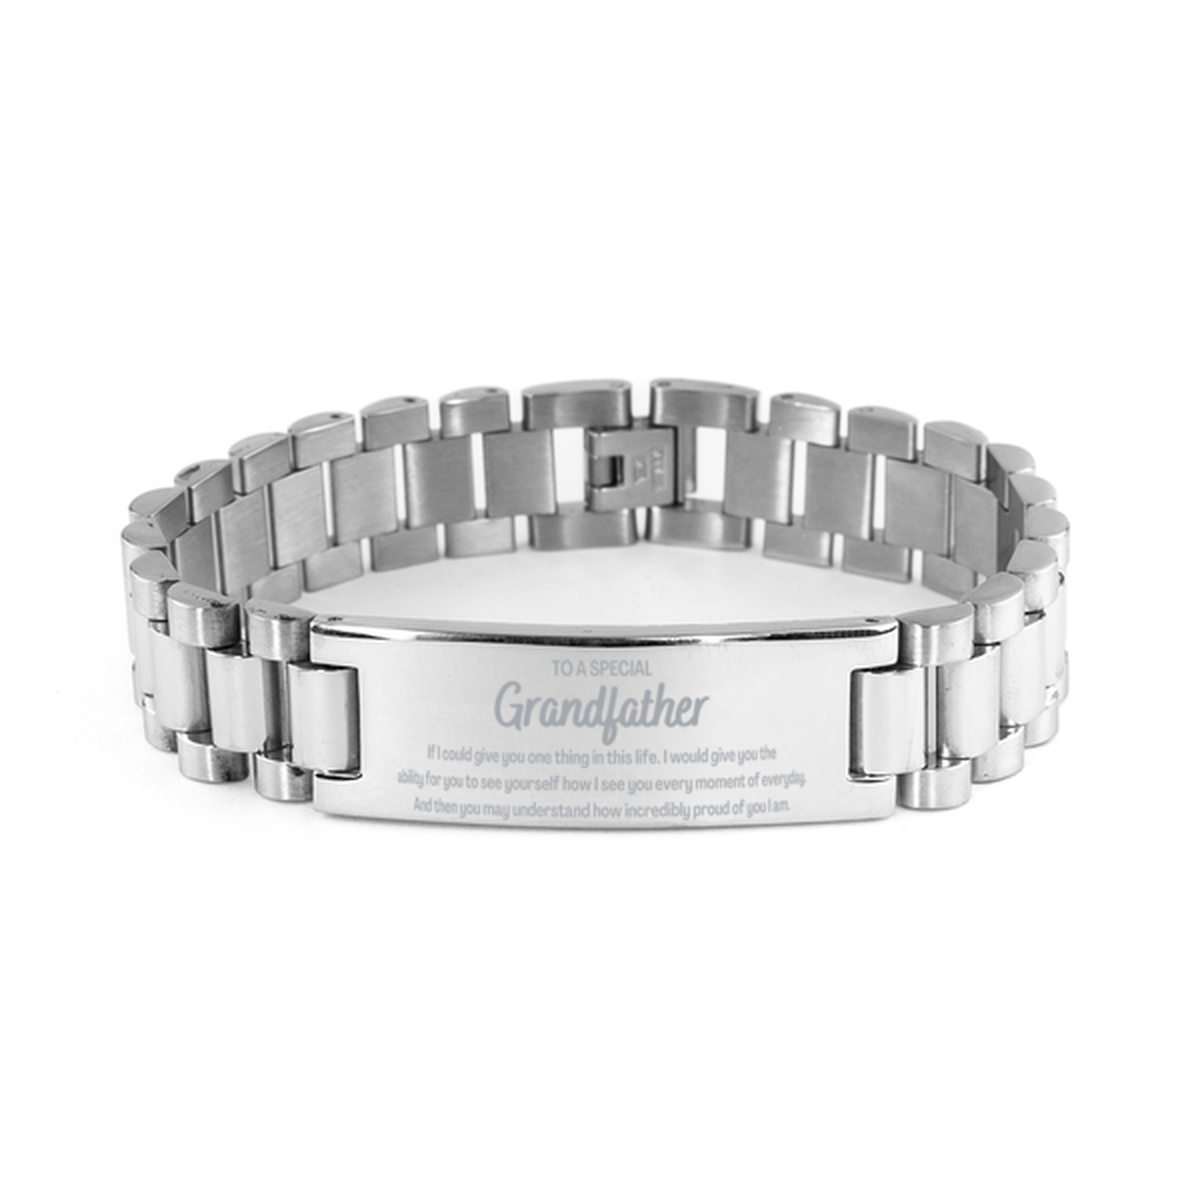 To My Grandfather Ladder Stainless Steel Bracelet, Gifts For Grandfather Engraved, Inspirational Gifts for Christmas Birthday, Epic Gifts for Grandfather To A Special Grandfather how incredibly proud of you I am